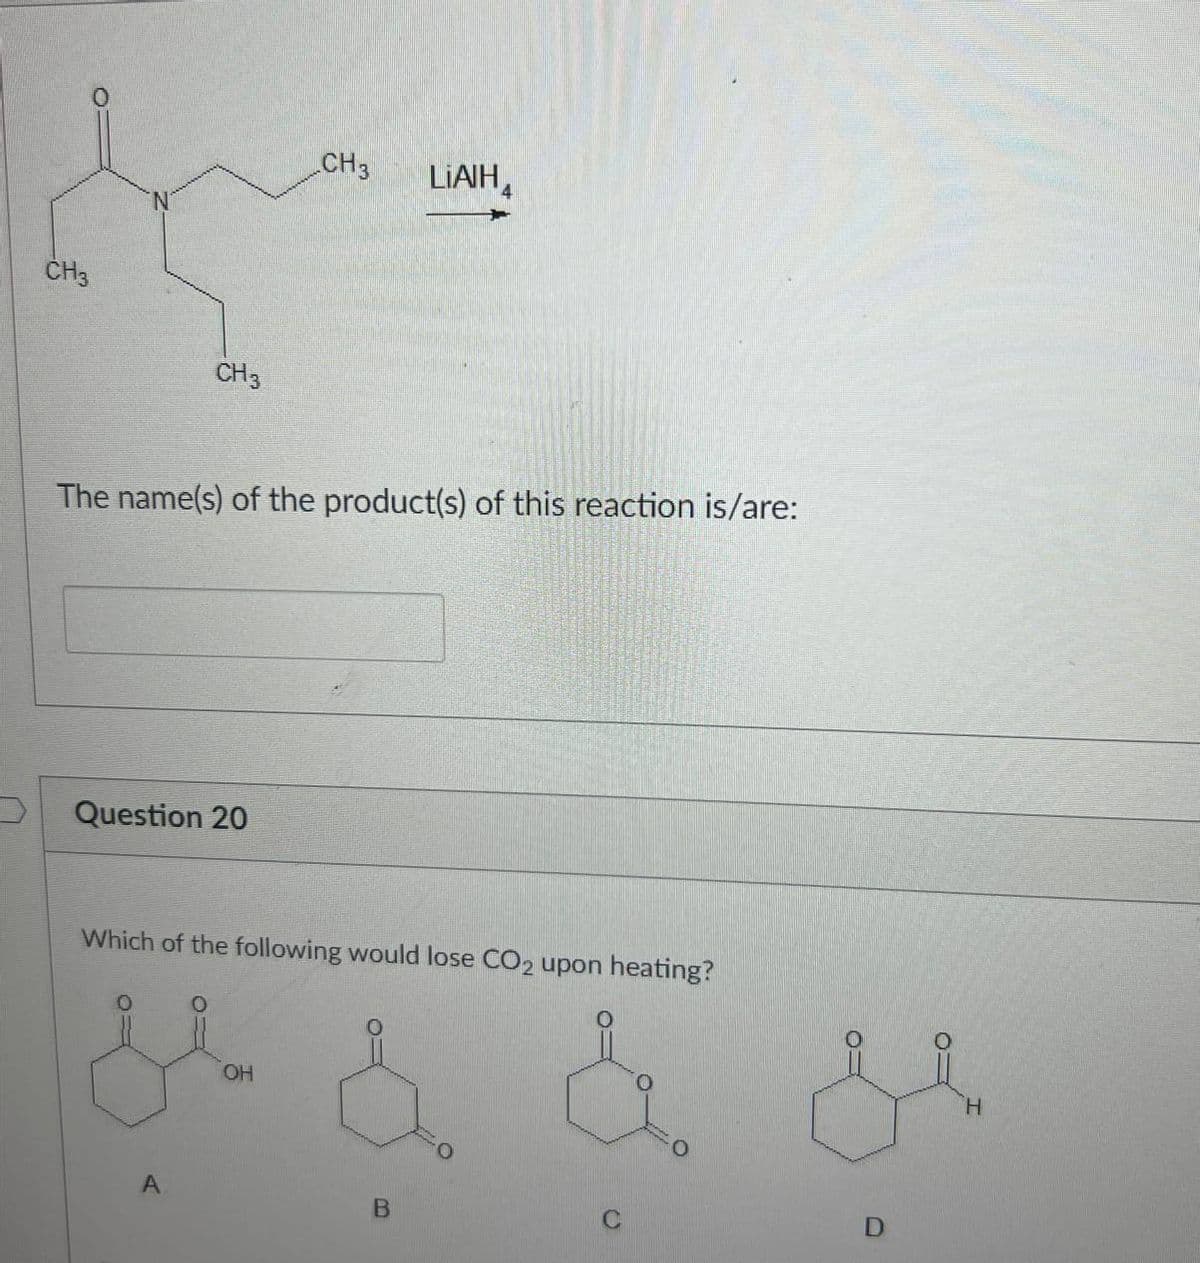 CH3
LIAIH
CH3
CH3
The name(s) of the product(s) of this reaction is/are:
Question 20
Which of the following would lose CO2 upon heating?
خفن
A
OH
& & &
B
D
H